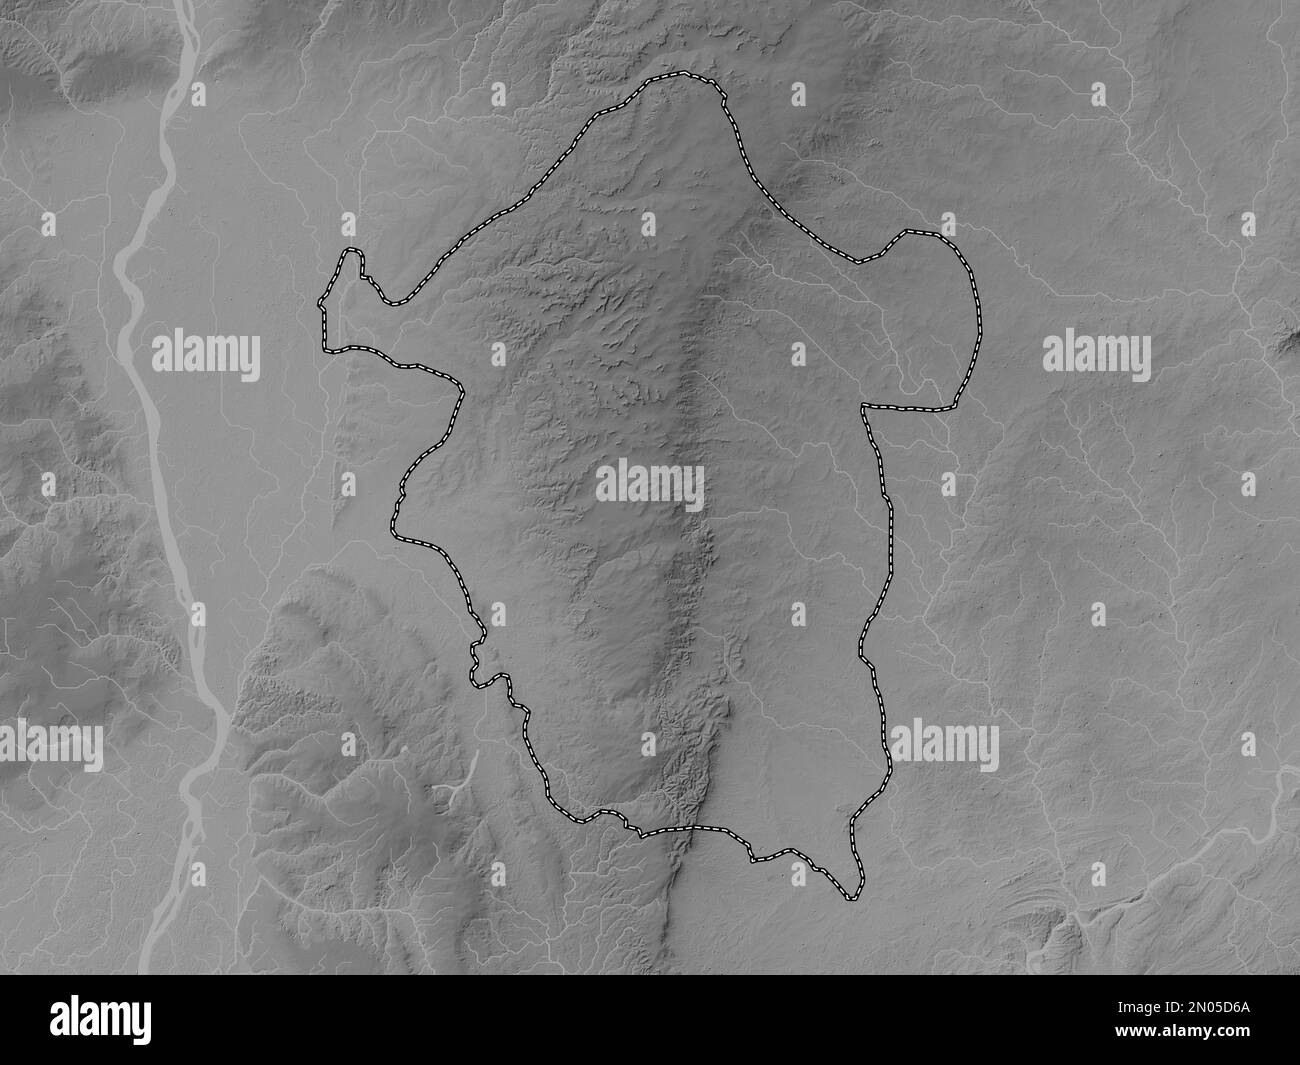 Enugu, state of Nigeria. Grayscale elevation map with lakes and rivers Stock Photo